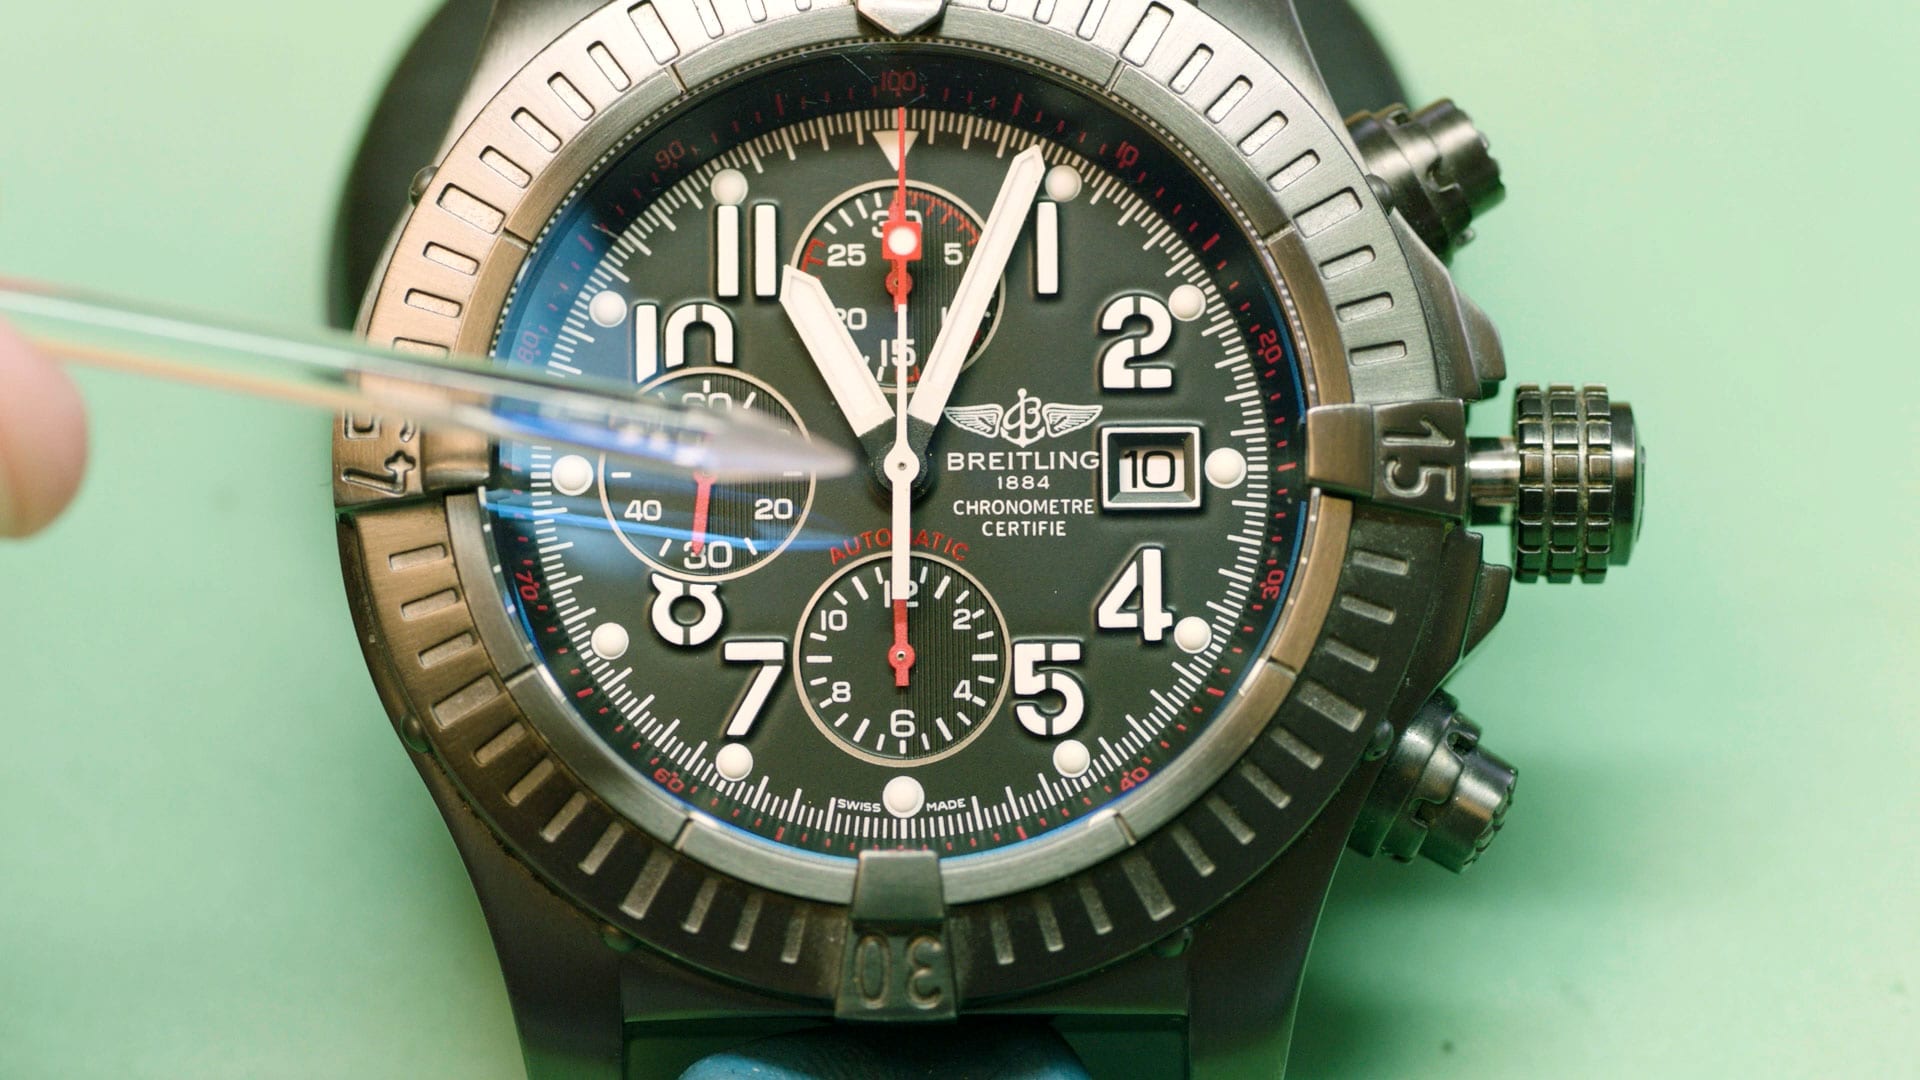 How to Spot a Fake Breitling Watch